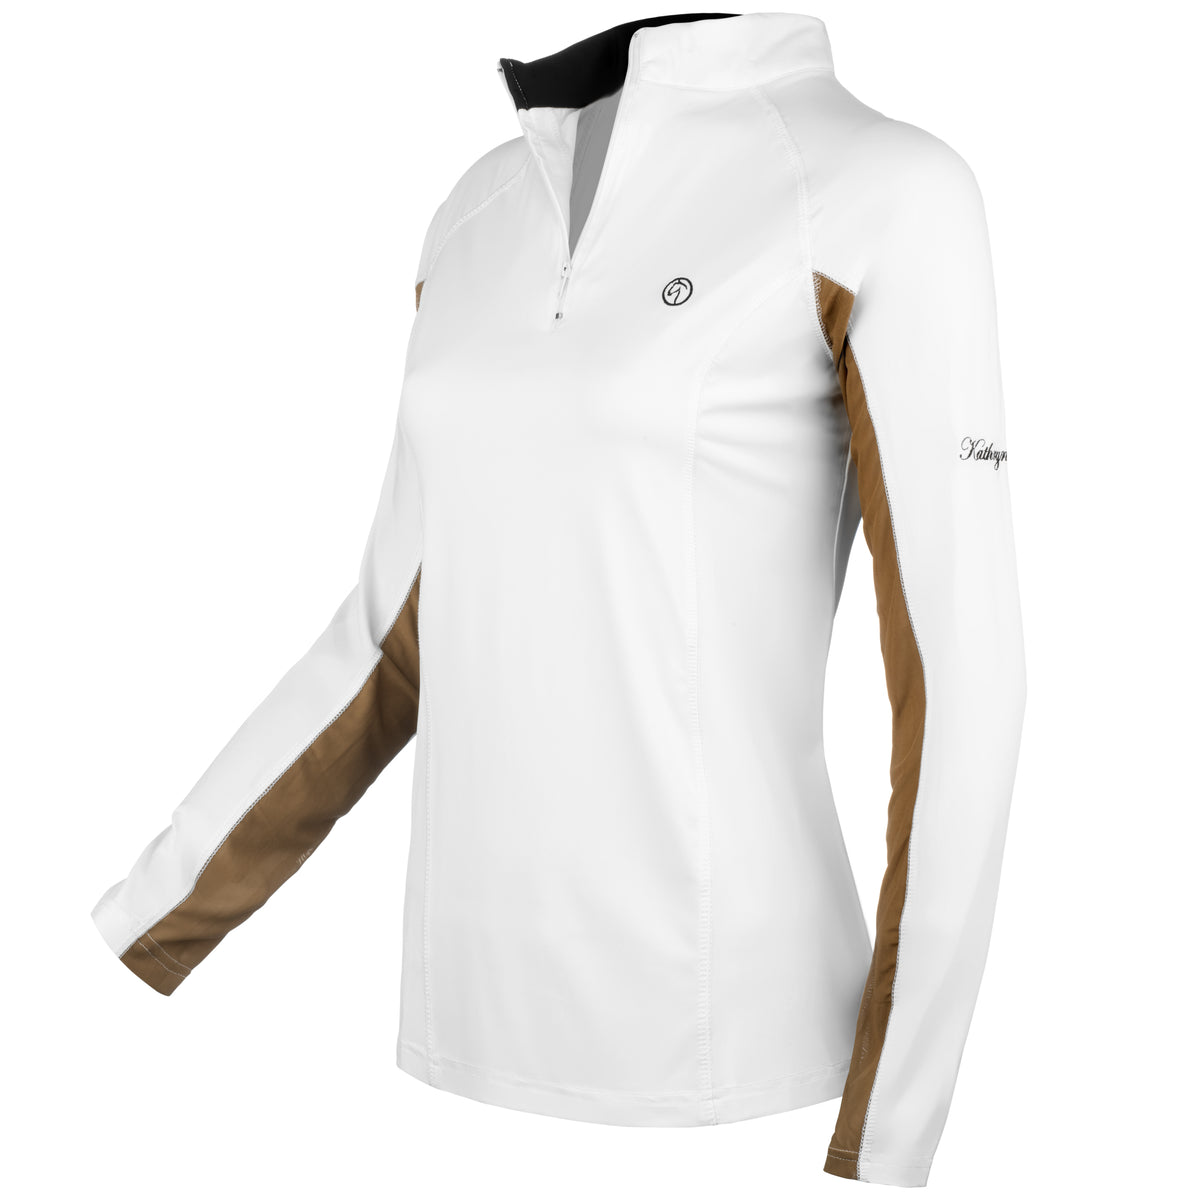 Sunshirt- White with Tan – Kathryn Lily Equestrian